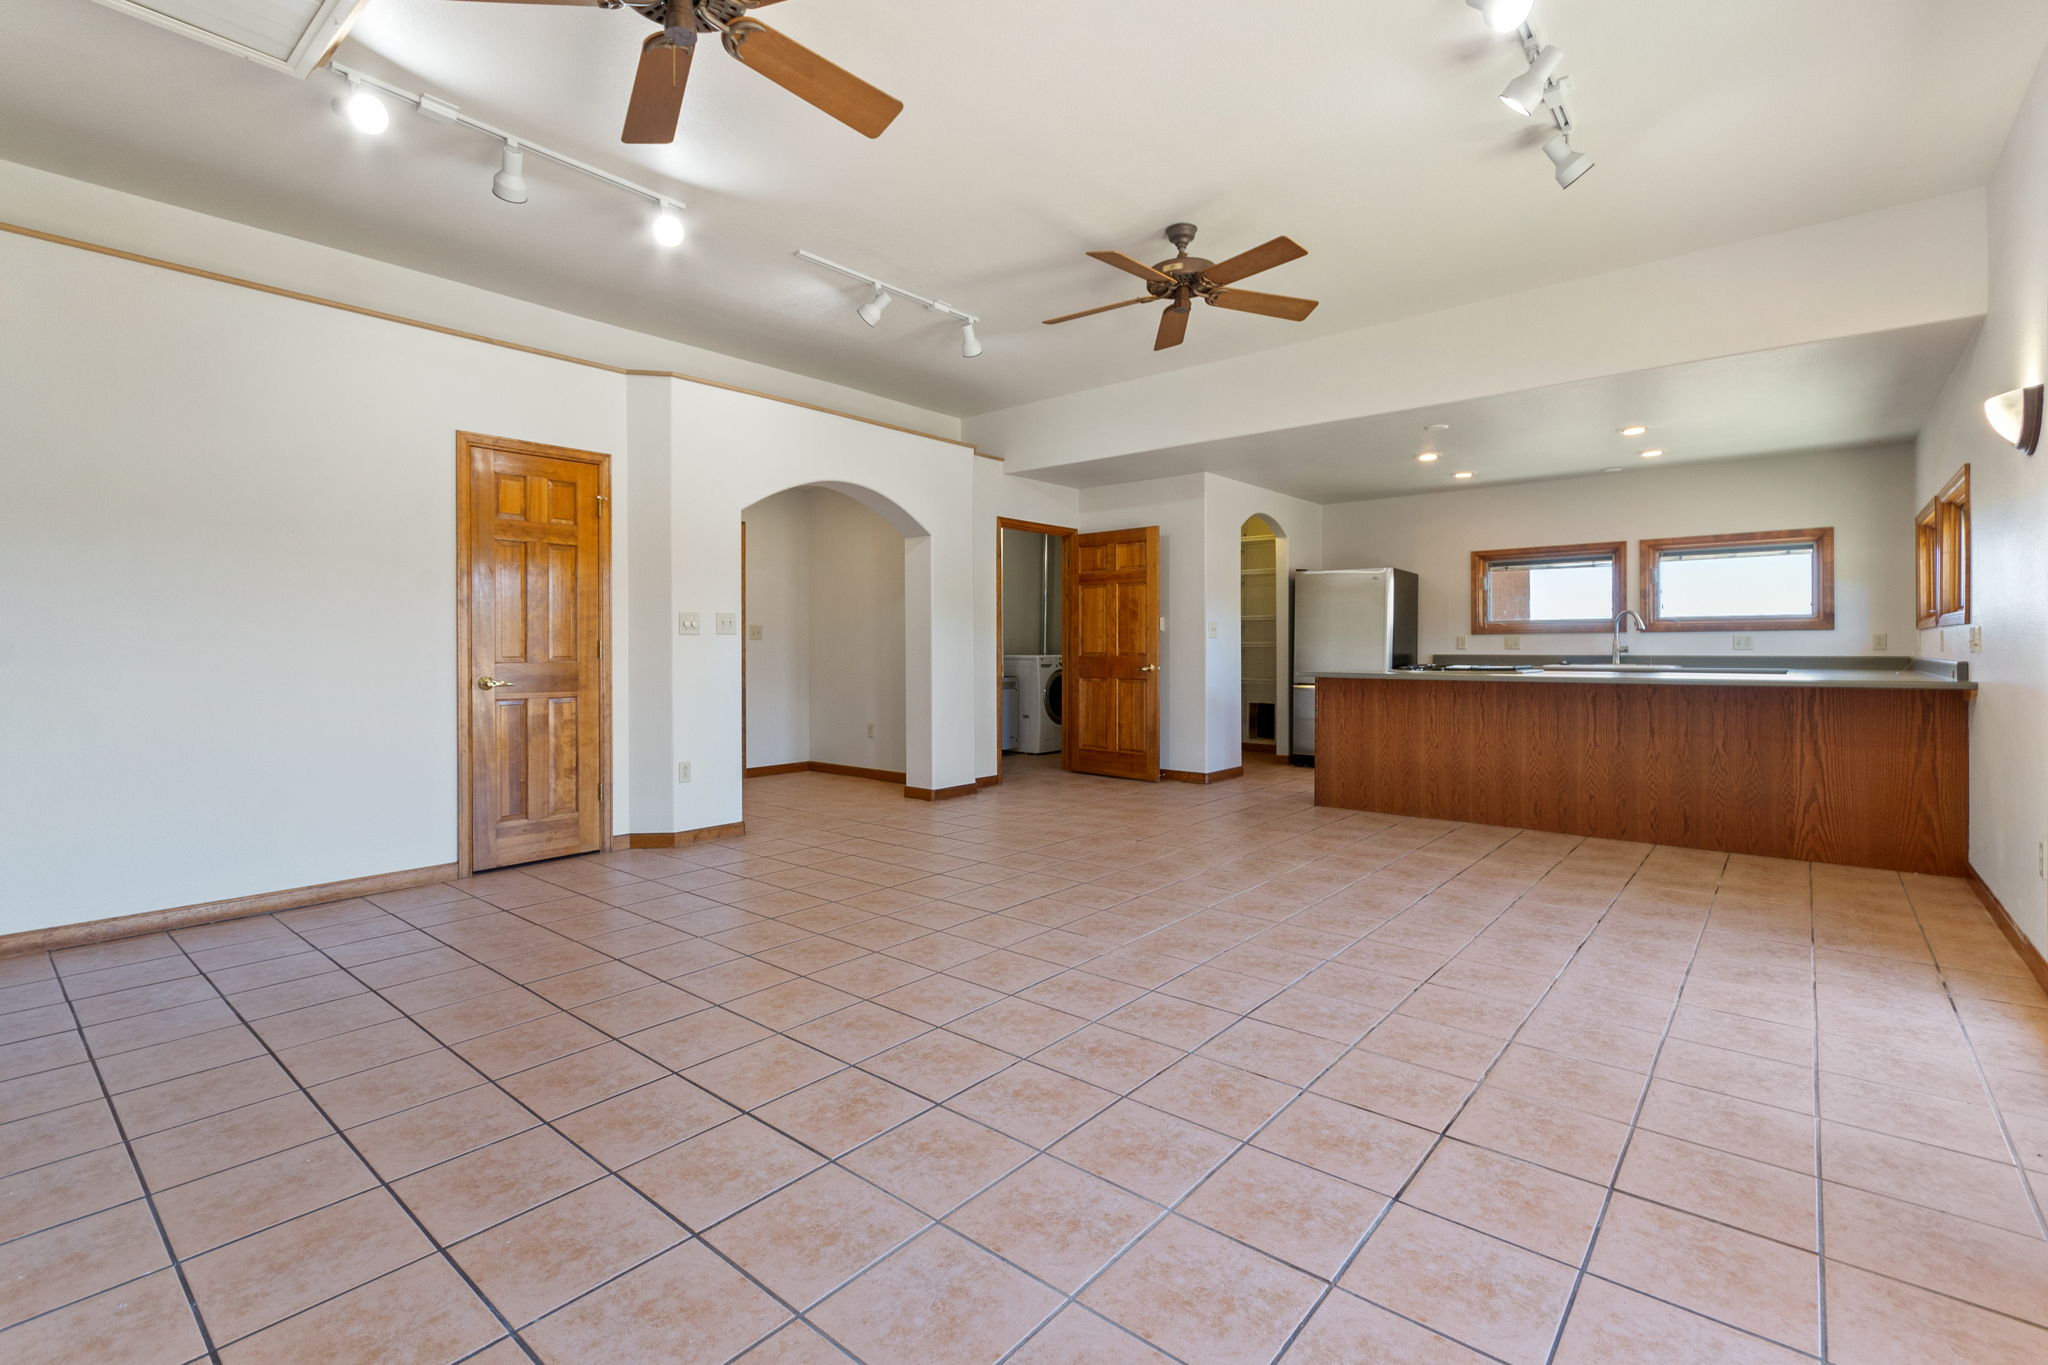  460 Co Rd 290, Florence, CO 81226, US Photo 17